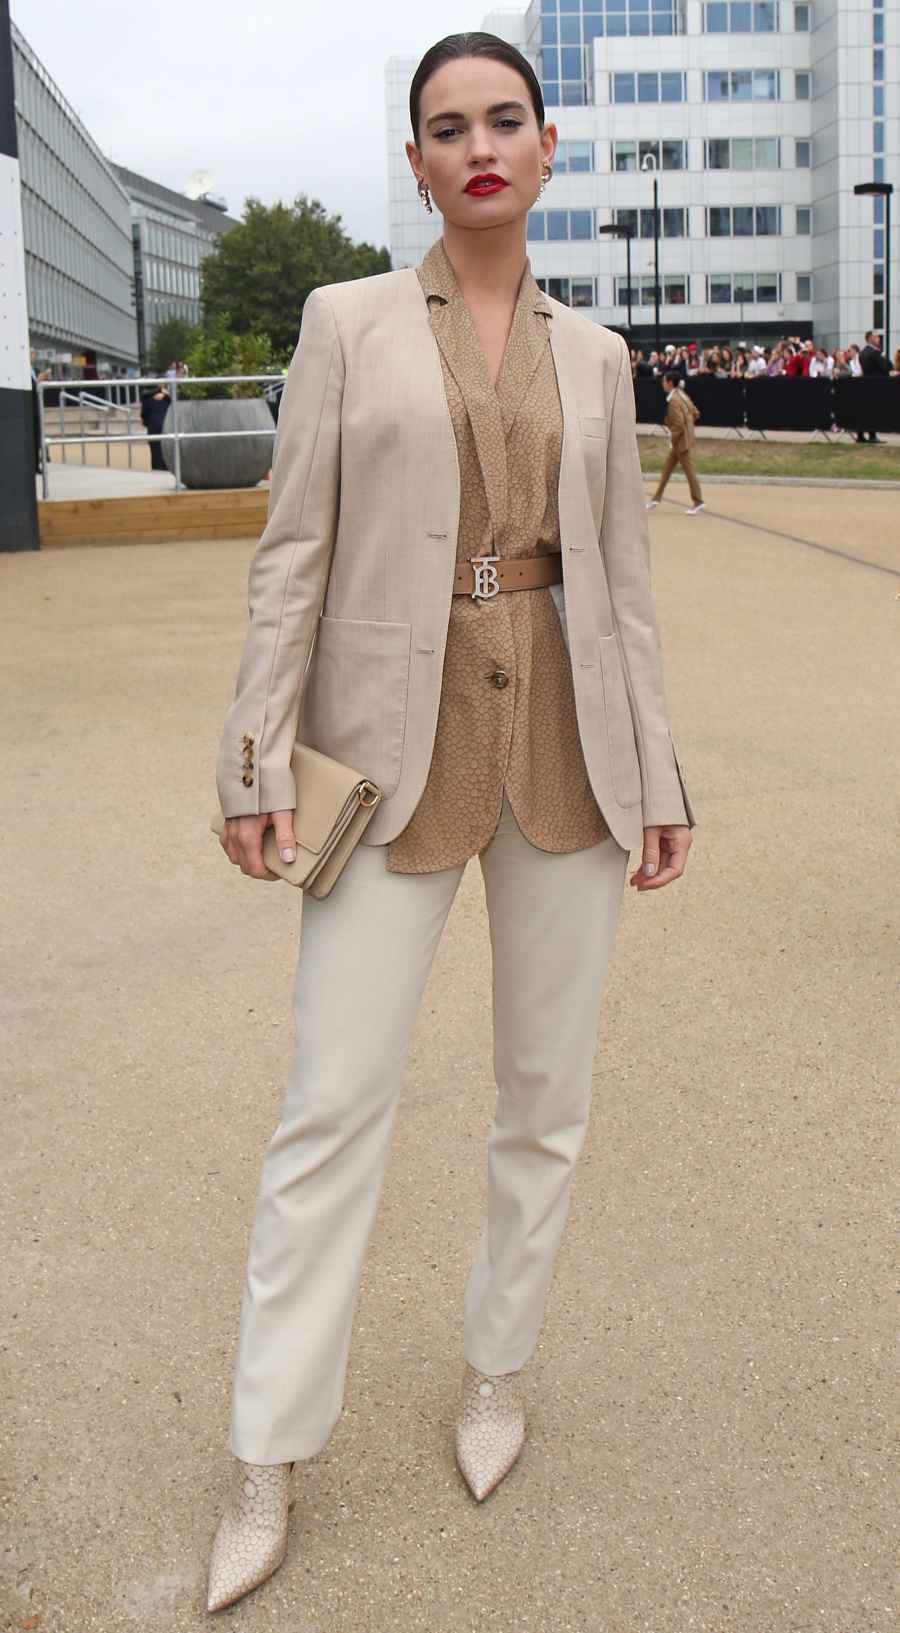 Celebs Wearing Burberry - Lily James